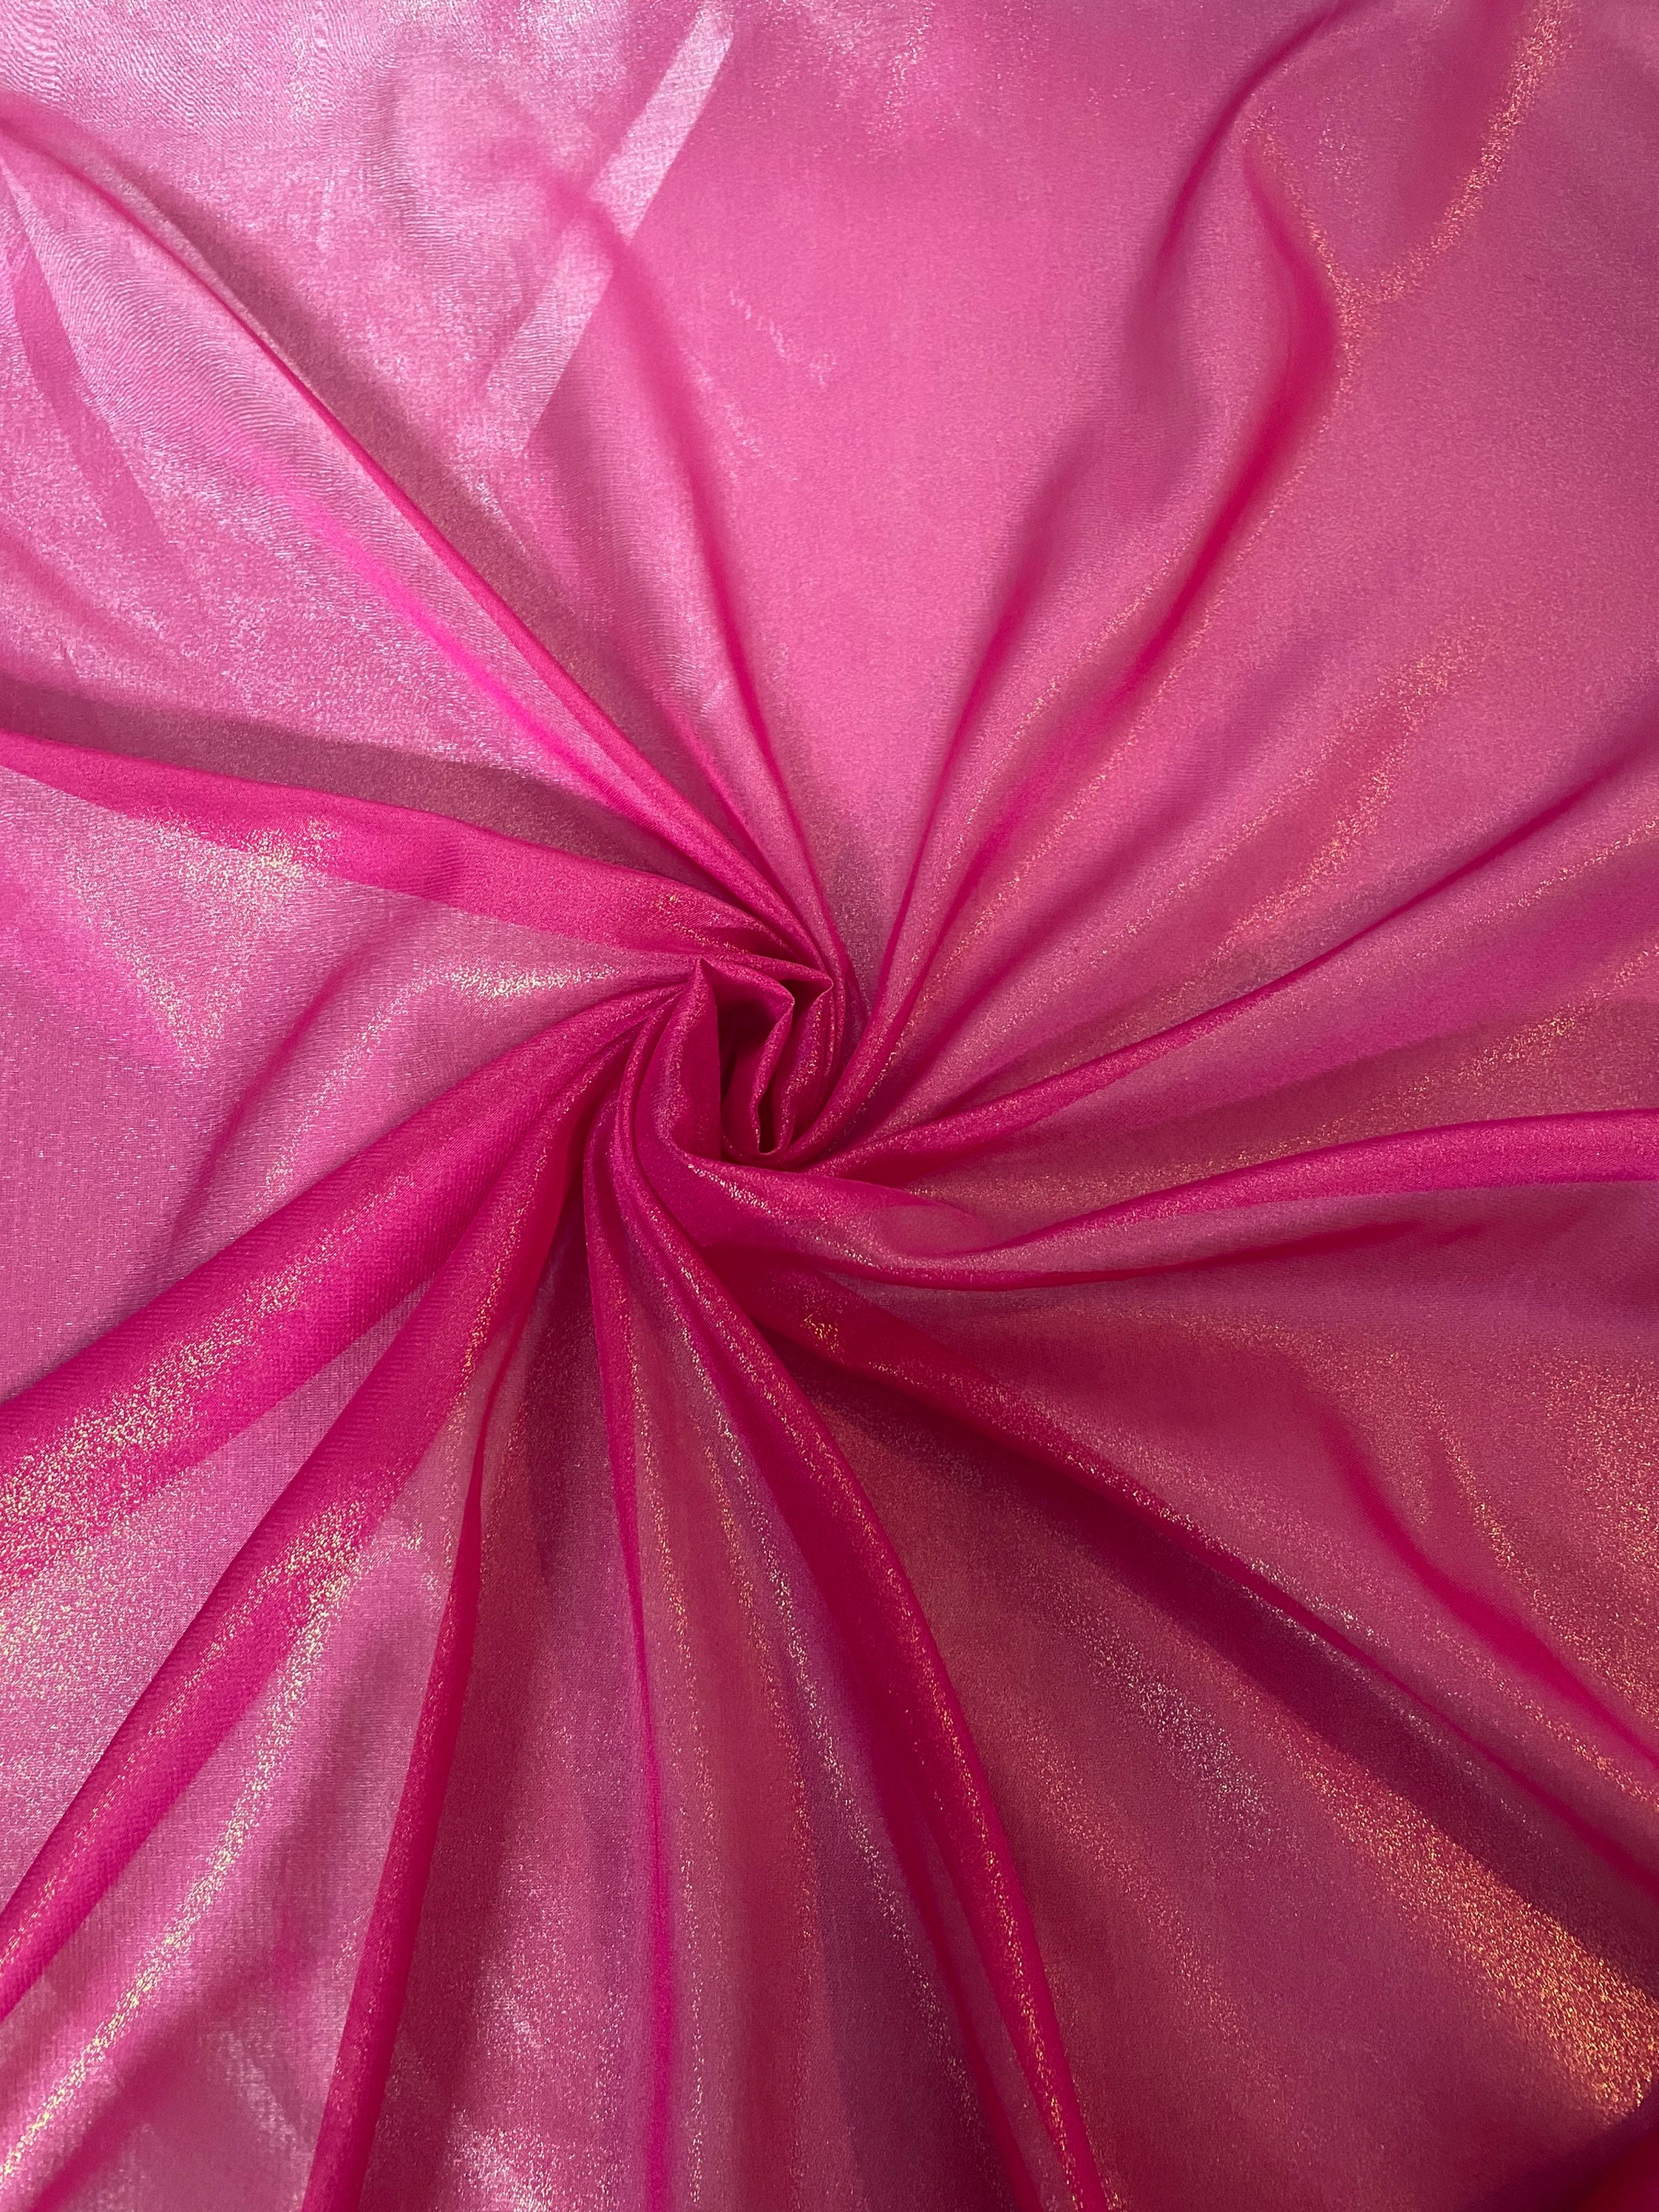 147cm 1 mtr hot pink/gold shimmer chiffon fabric..58” wide 